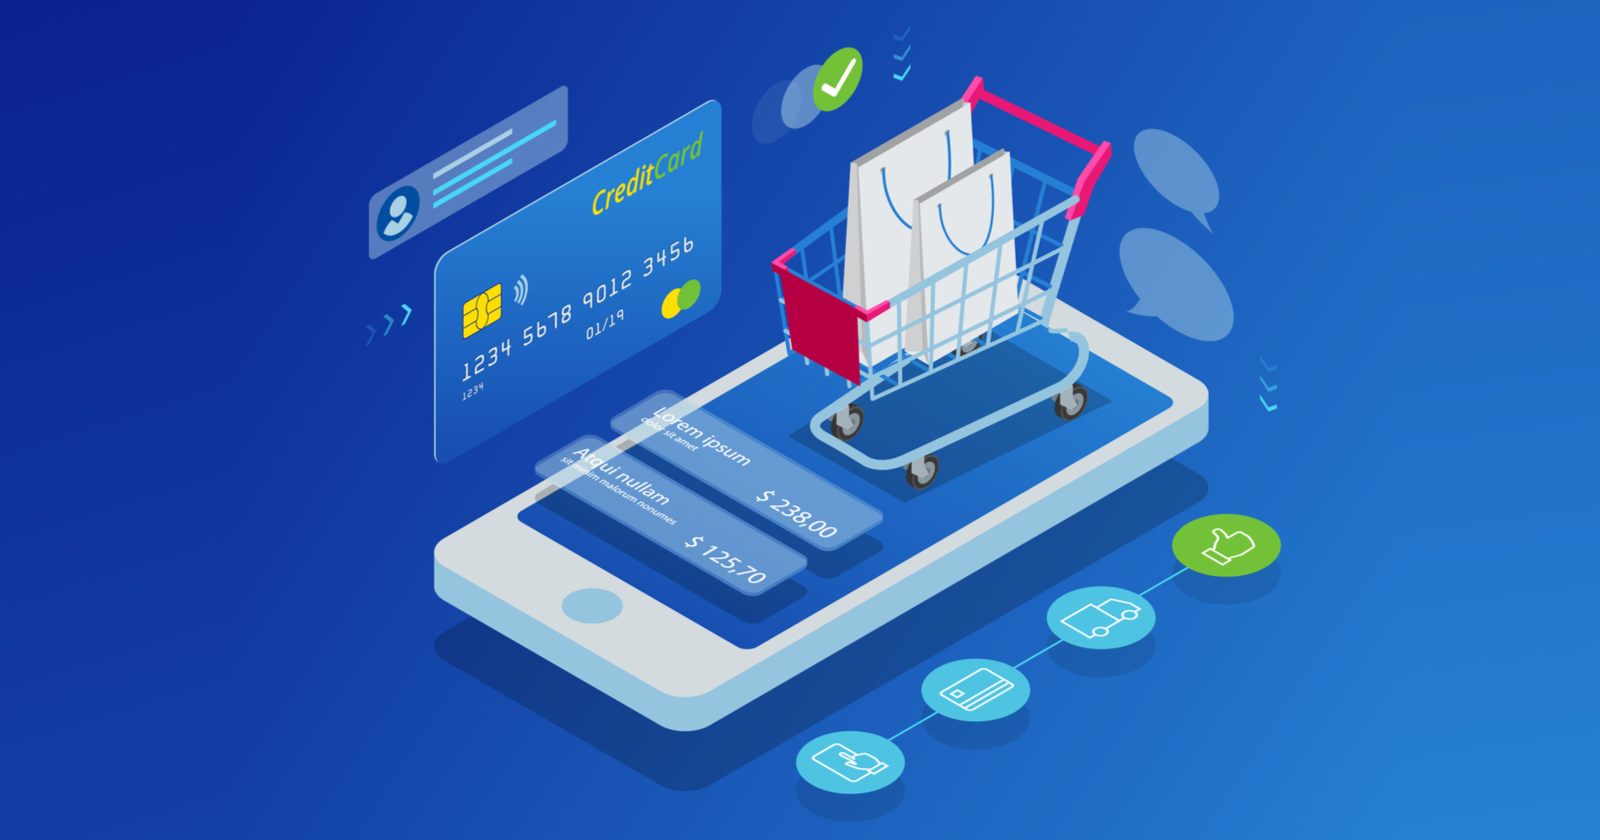 Cart.com advances leadership in end-to-end ecommerce with expanded headless capabilities